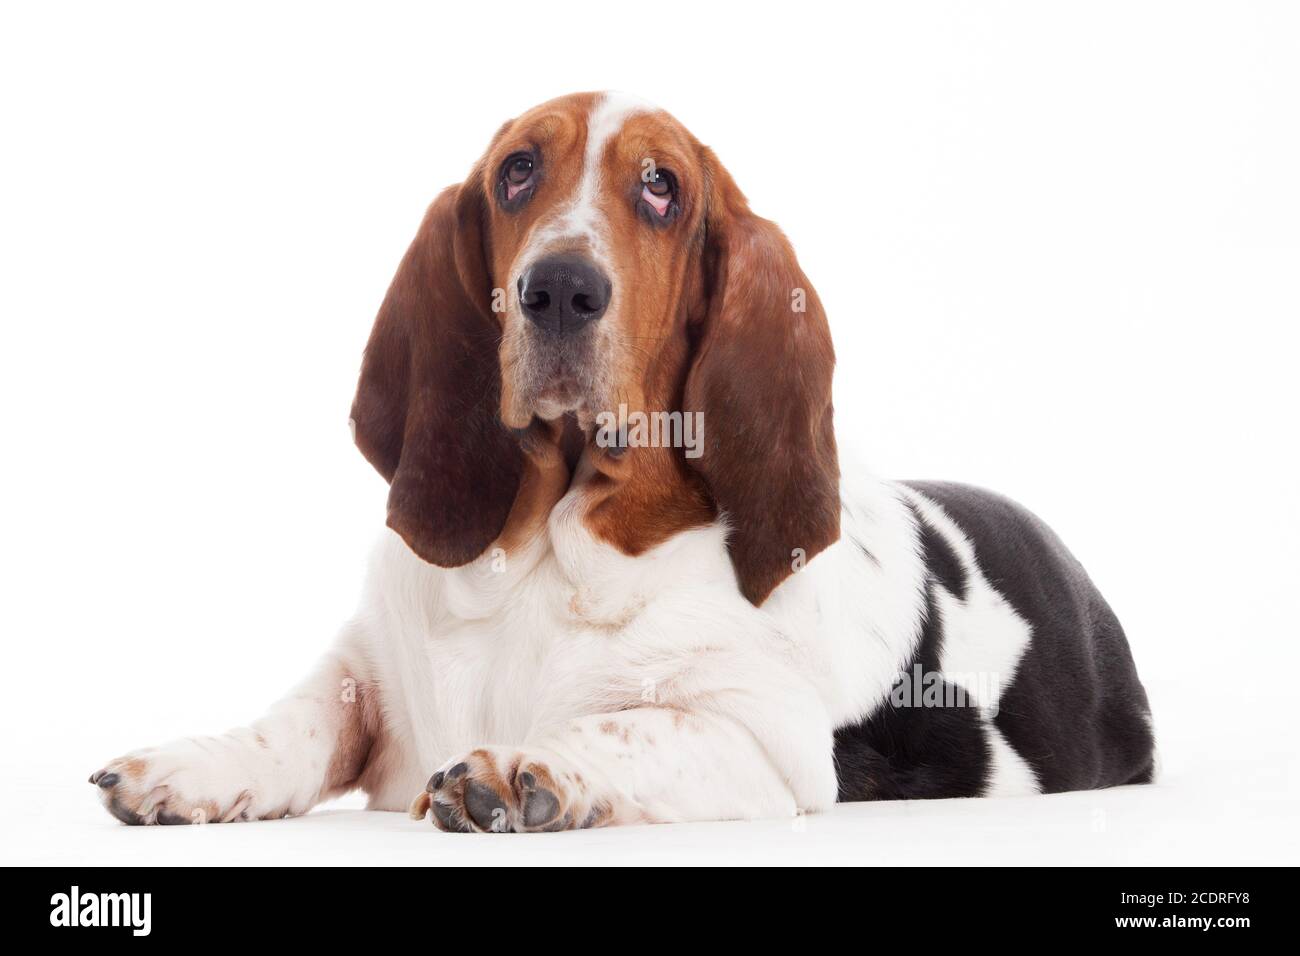 Hush Puppy Dogs High Resolution Stock Photography and Images - Alamy